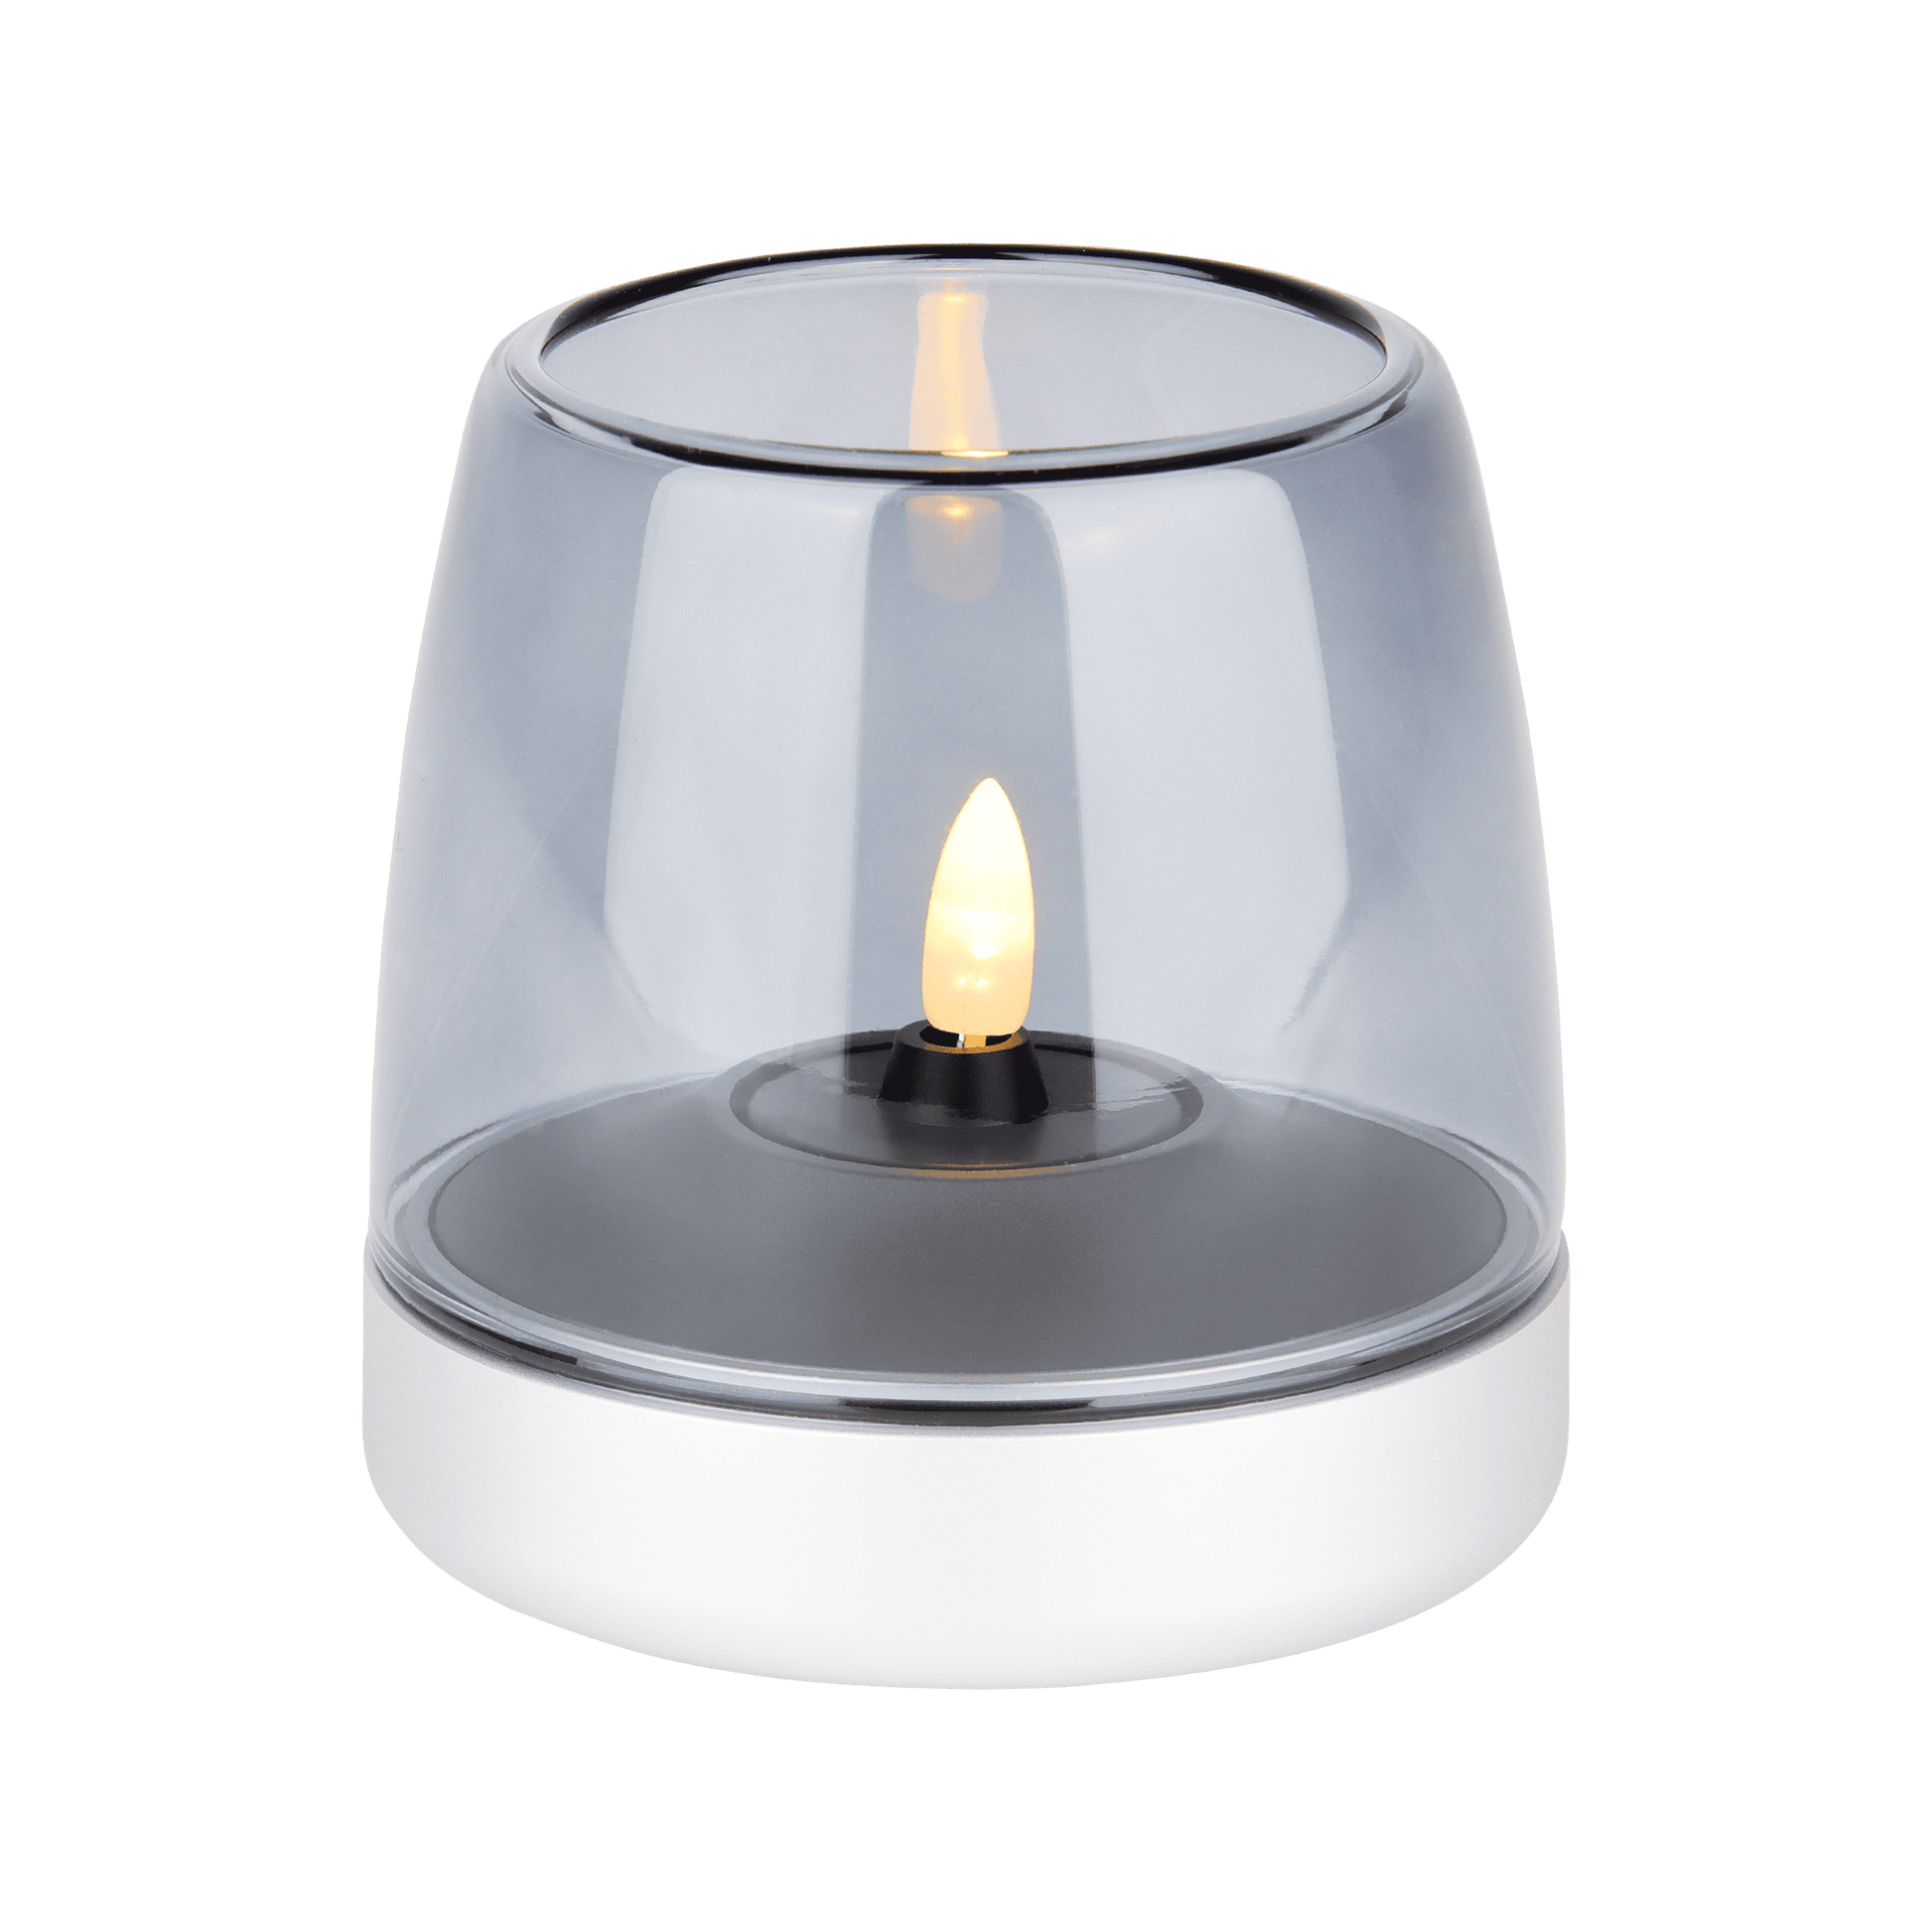 Kooduu Glow 10 Portable LED Flameless Candle in Frosted Silver (Size: ø9 x 9 cm)